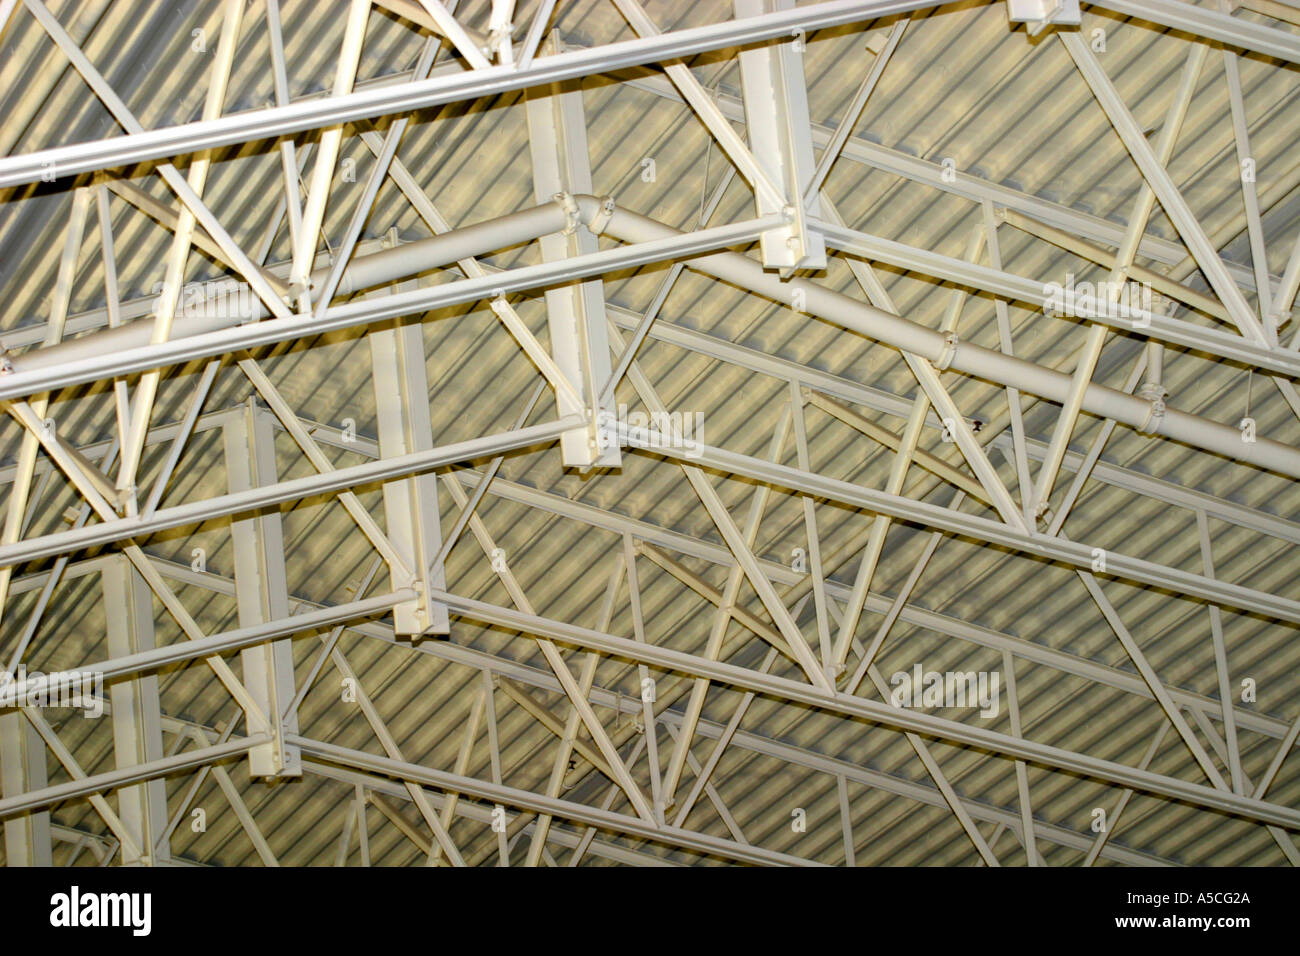 Architecture Roof truss Stock Photo